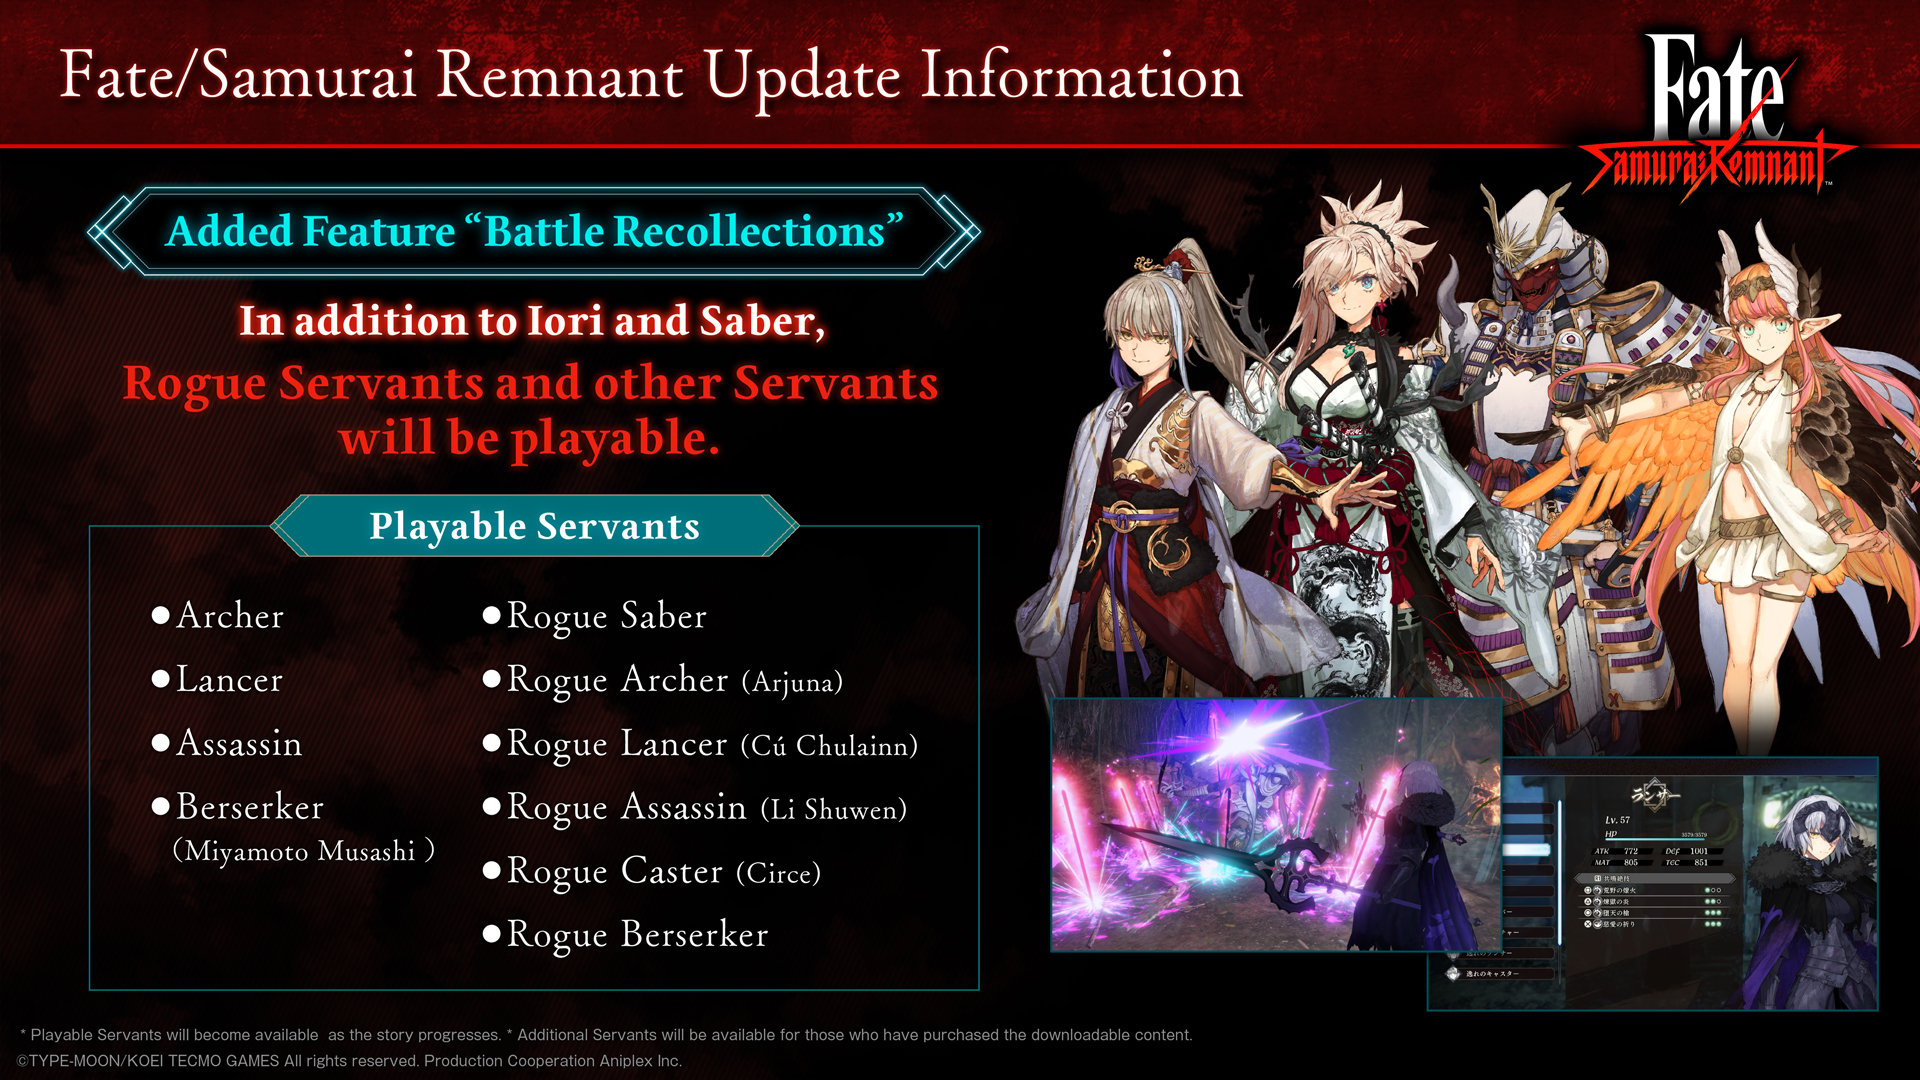 #
      Fate/Samurai Remnant version 1.03 update now available, adds new difficulty levels, playable Servants